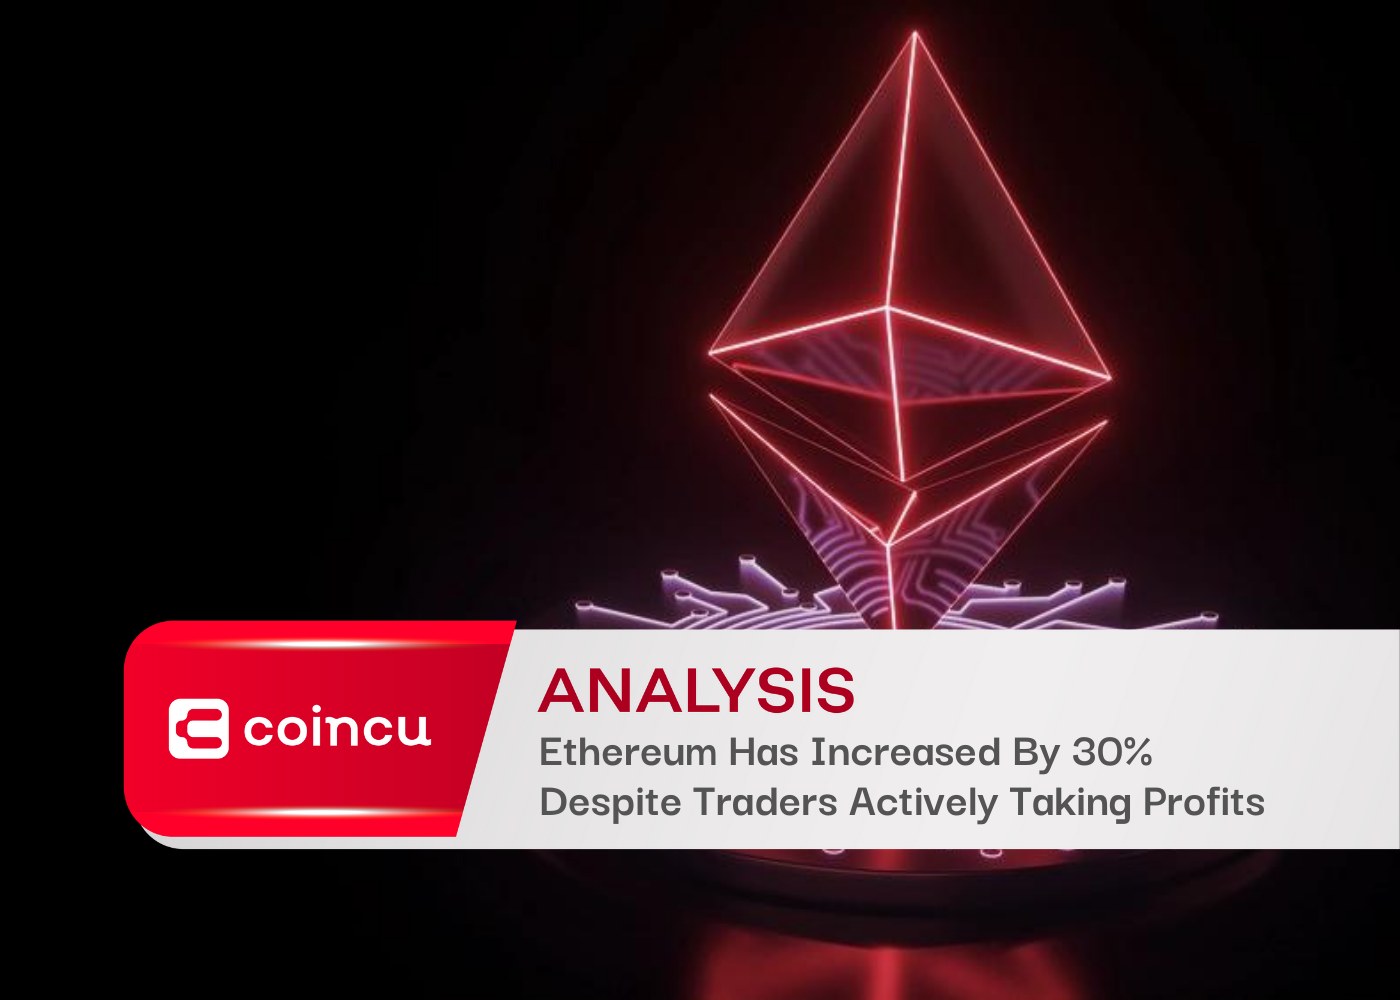 Ethereum Has Increased By 30